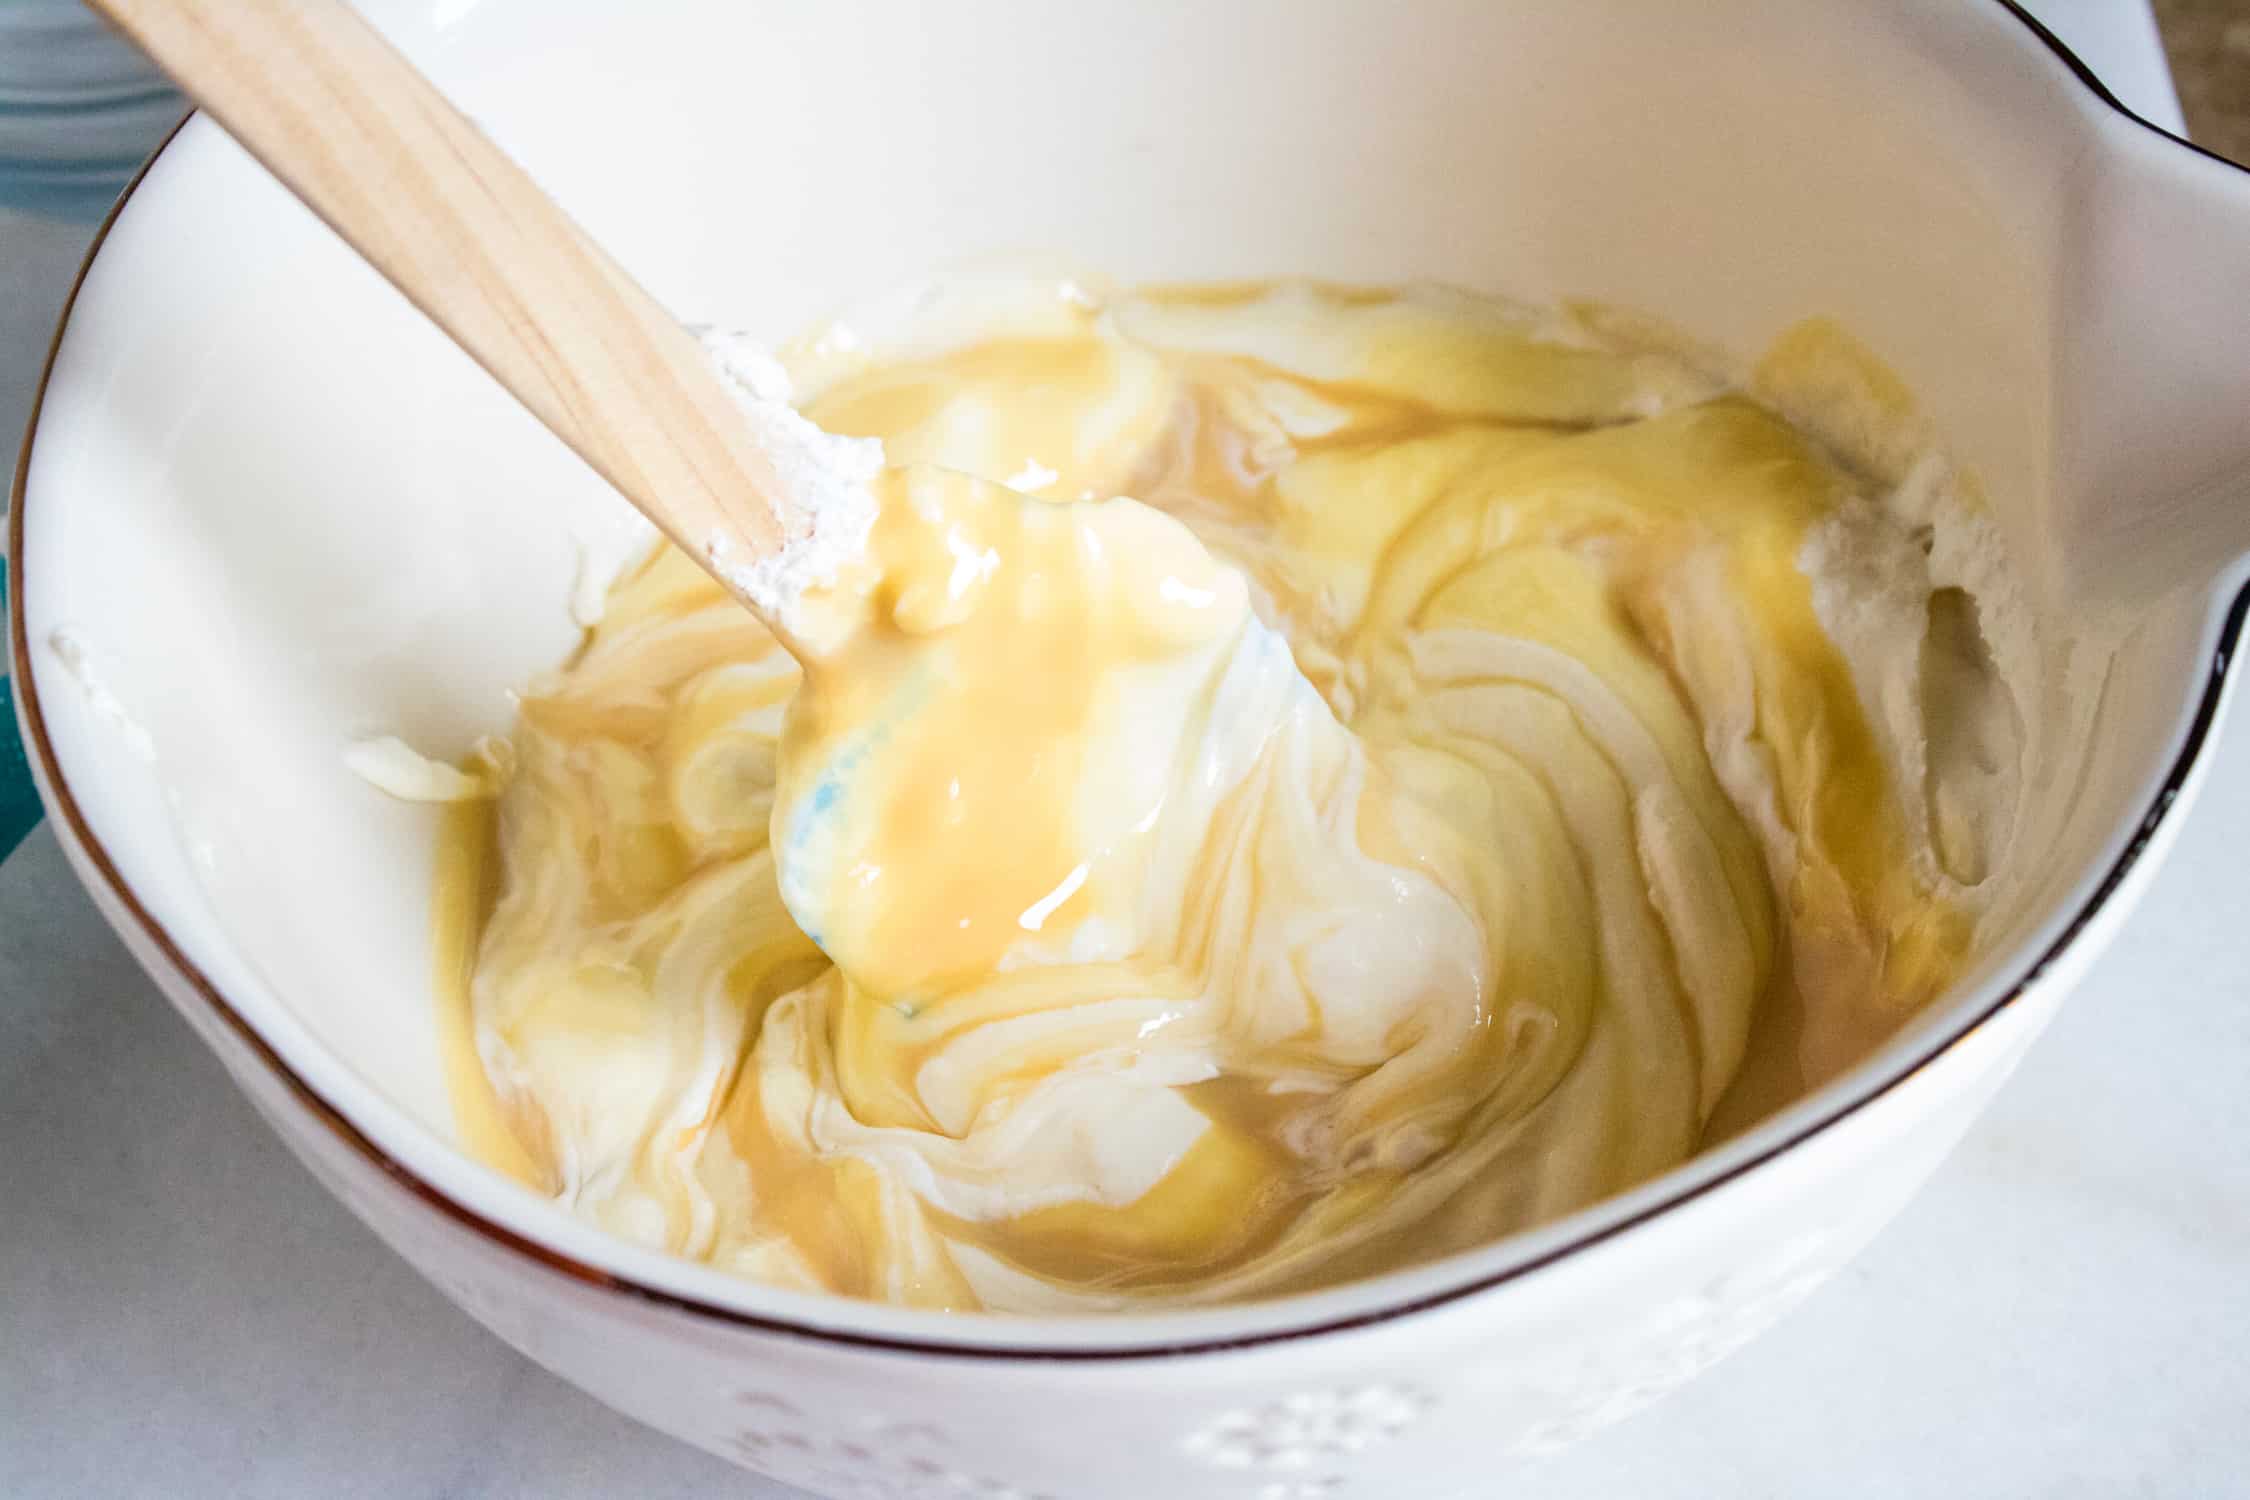 Whipped cream and sweetened condensed milk being mixed together in a white bowl with a spatula